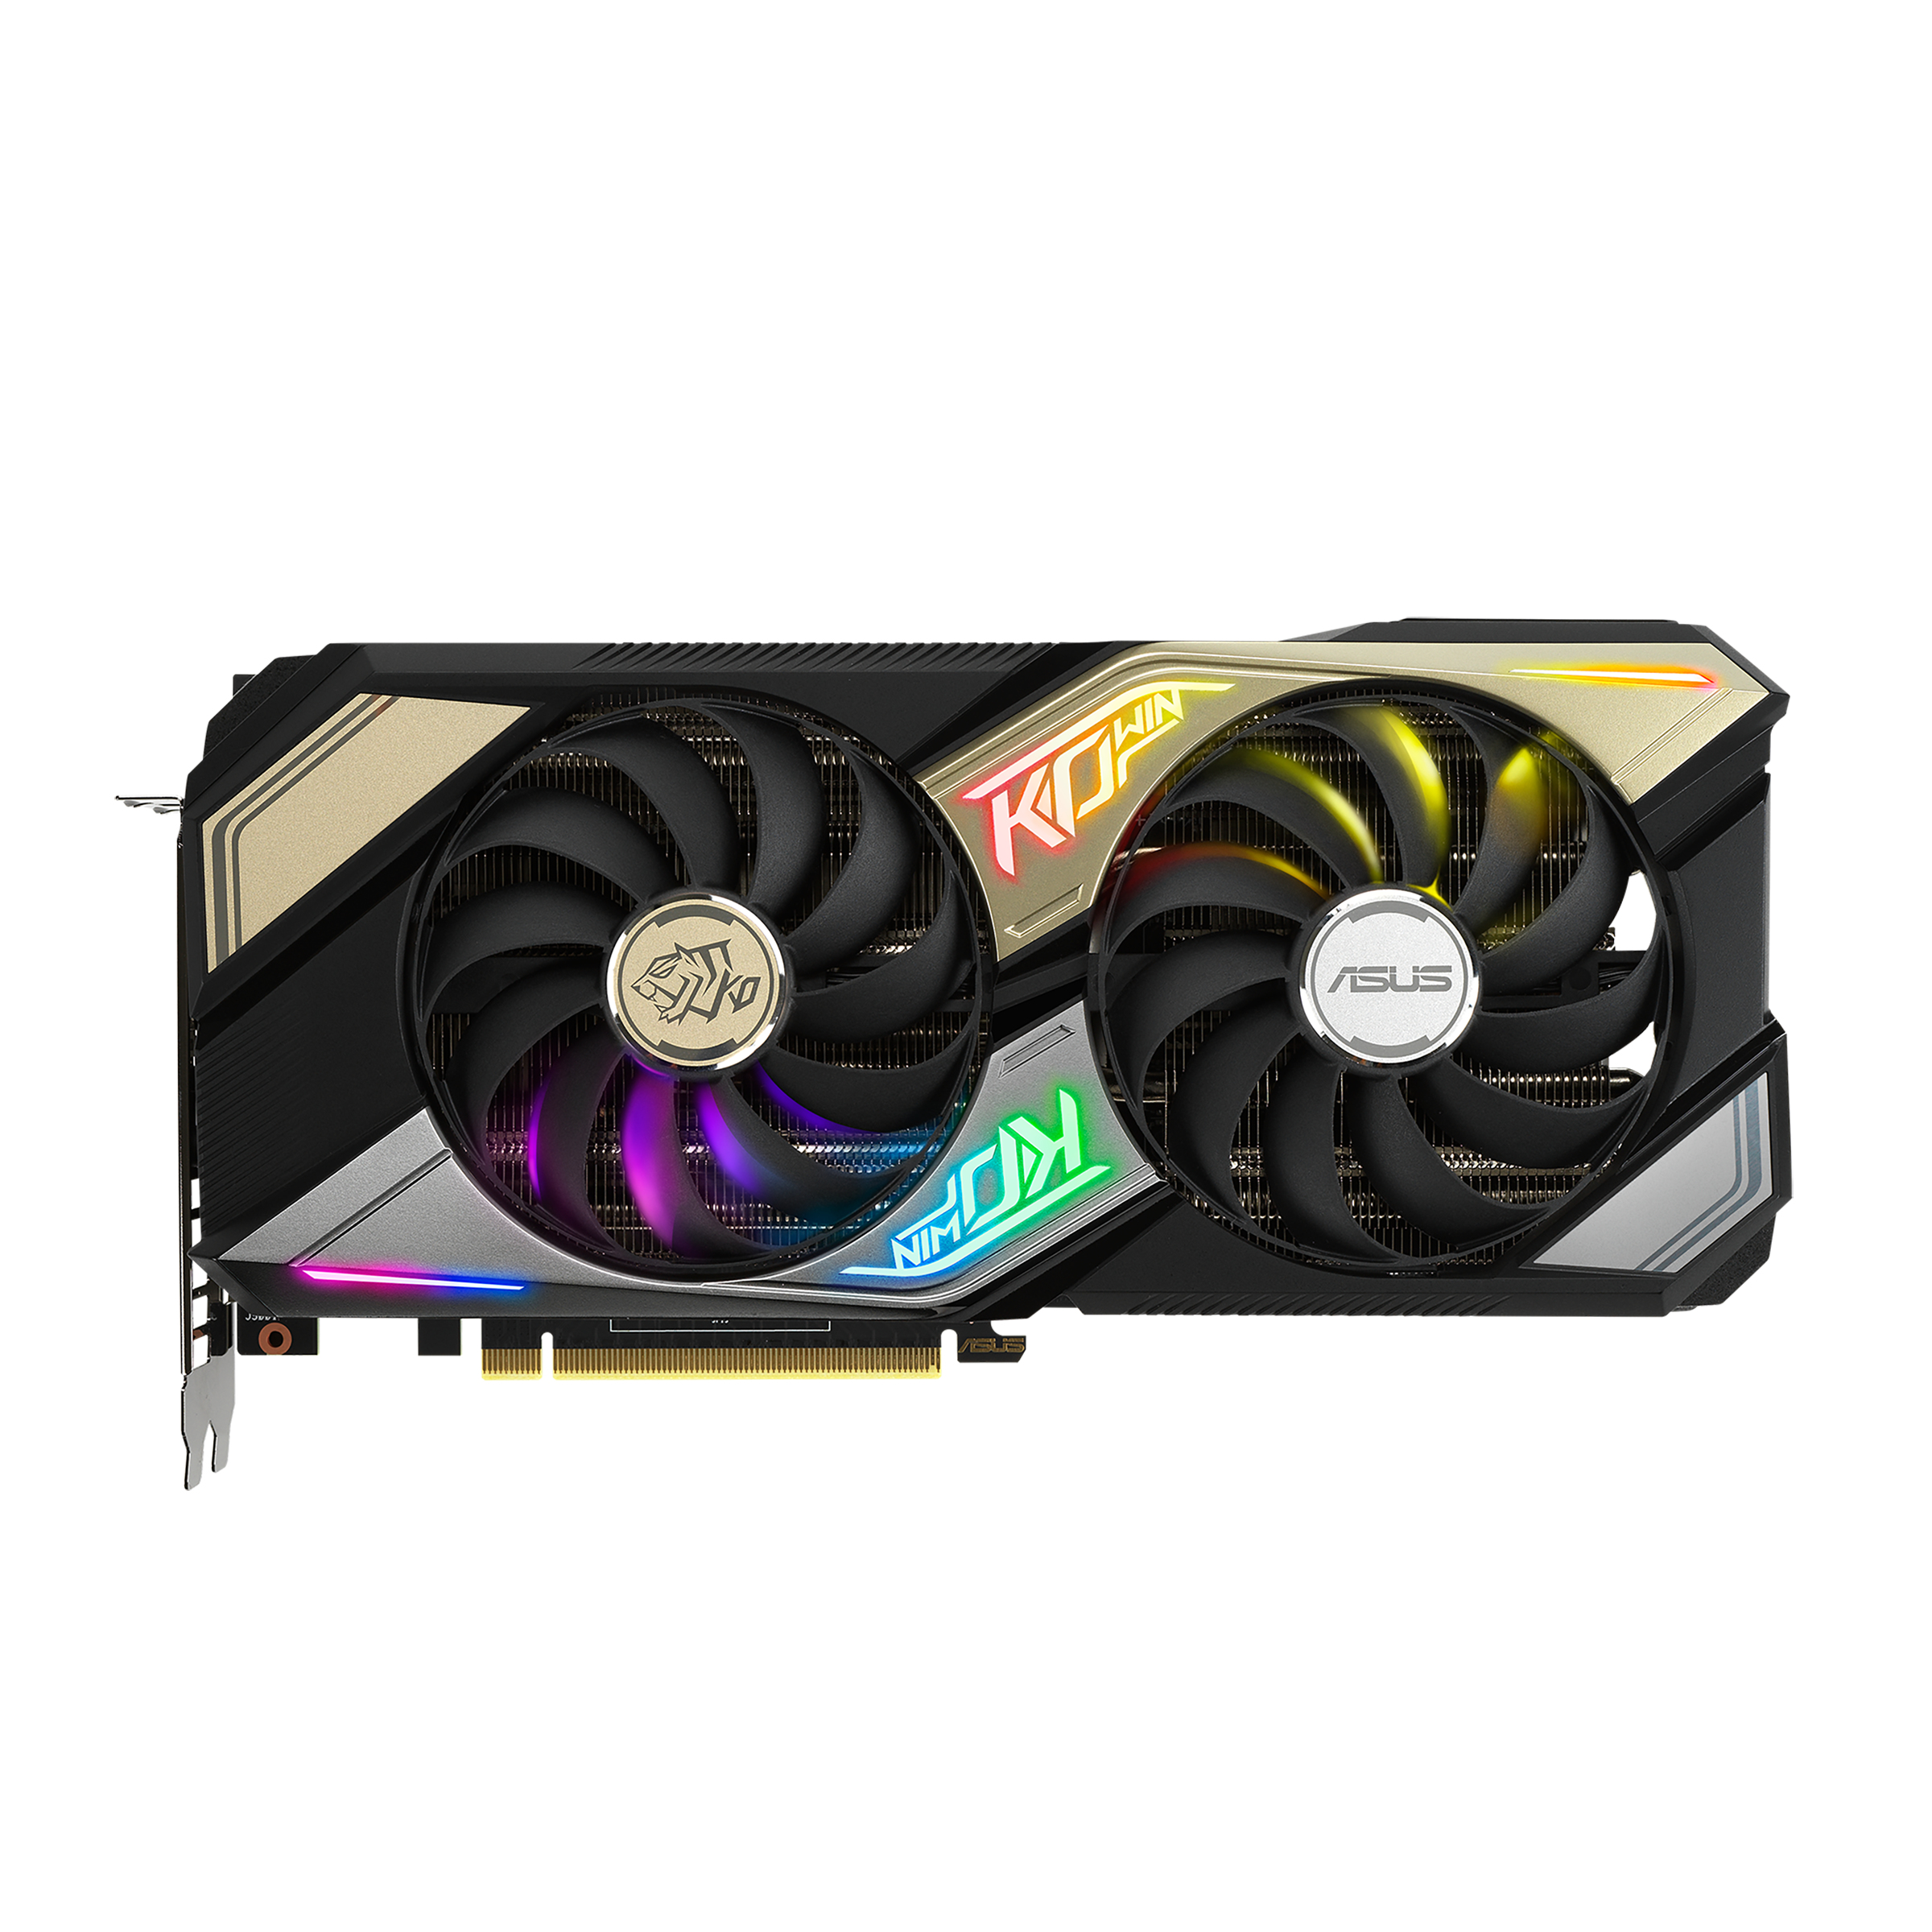 ASUS KO GEFORCE RTX 3060 TI V2 OC EDITION 8GB GDDR6 WITH LHR ADDS A TOUCH OF FLA